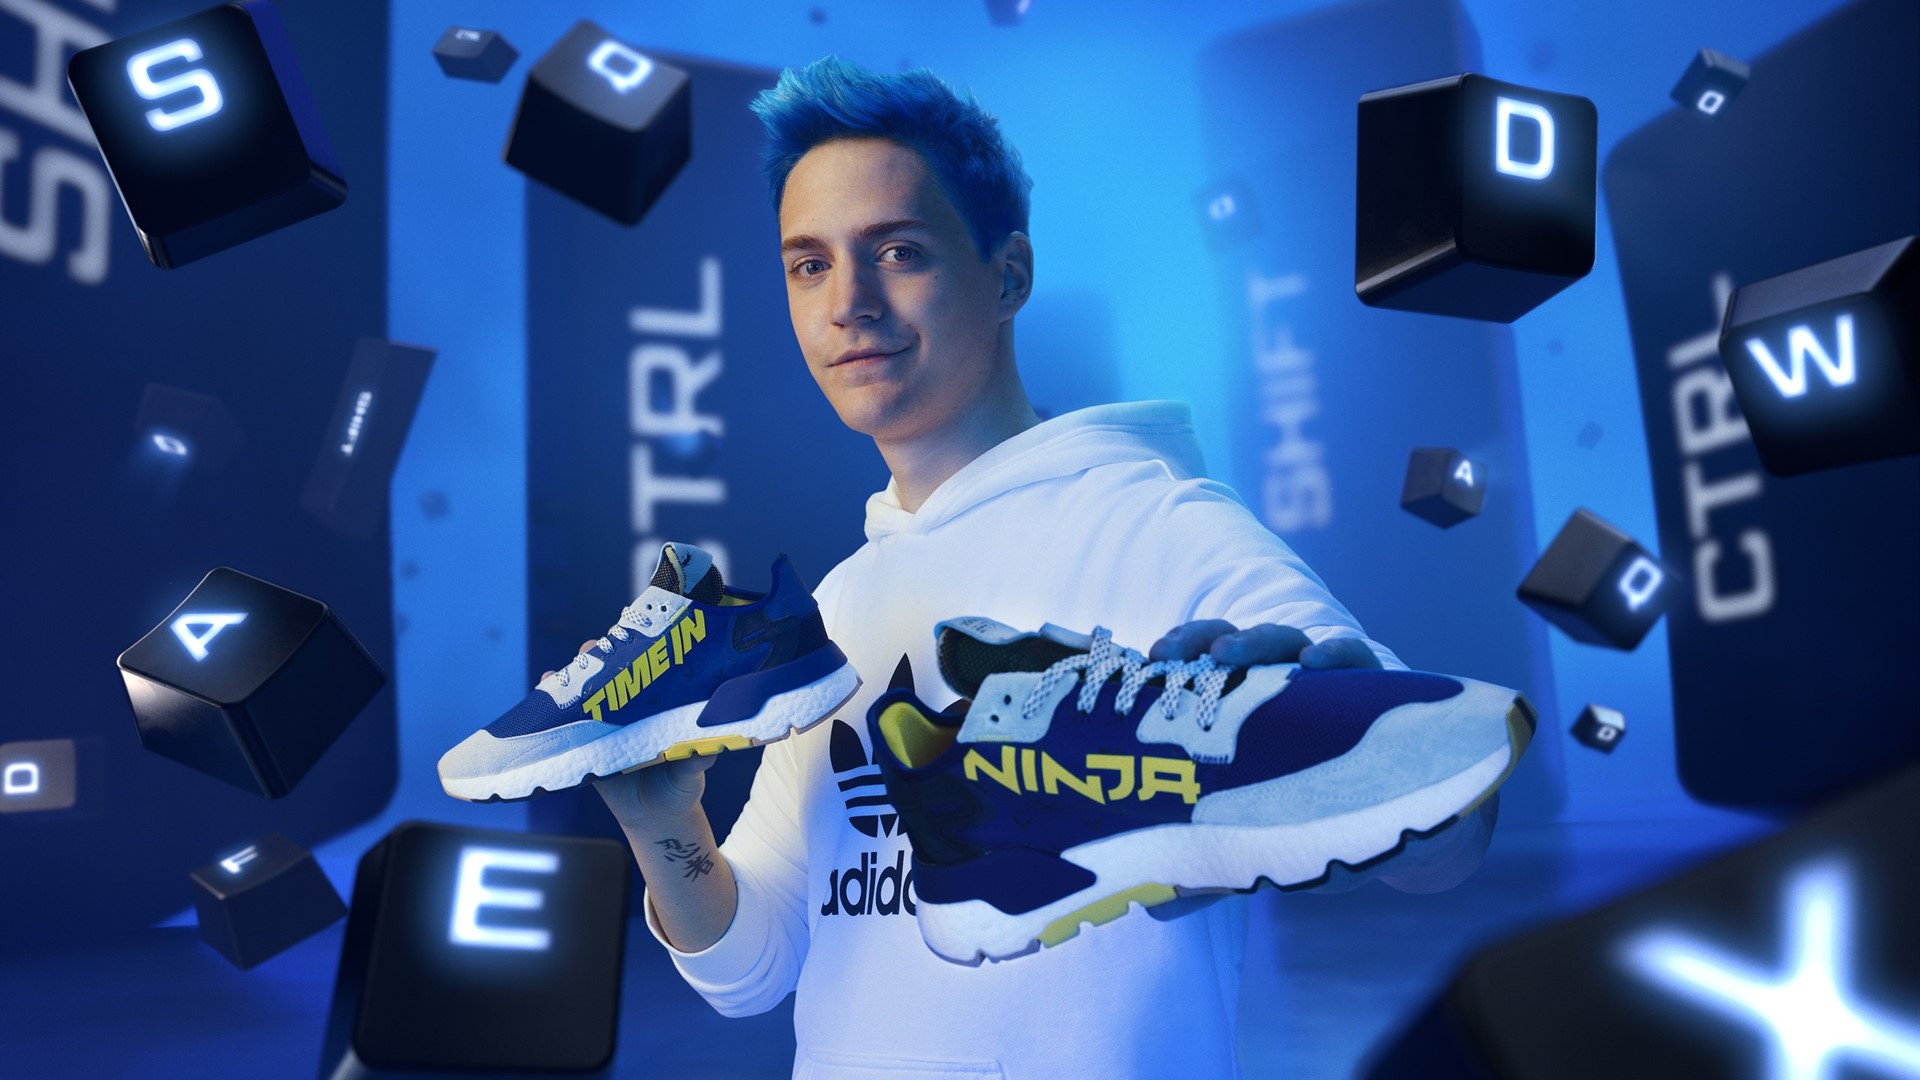 Twinkle setup Dialogue adidas and Ninja Launch Collaborative 'Time In' Nite Jogger